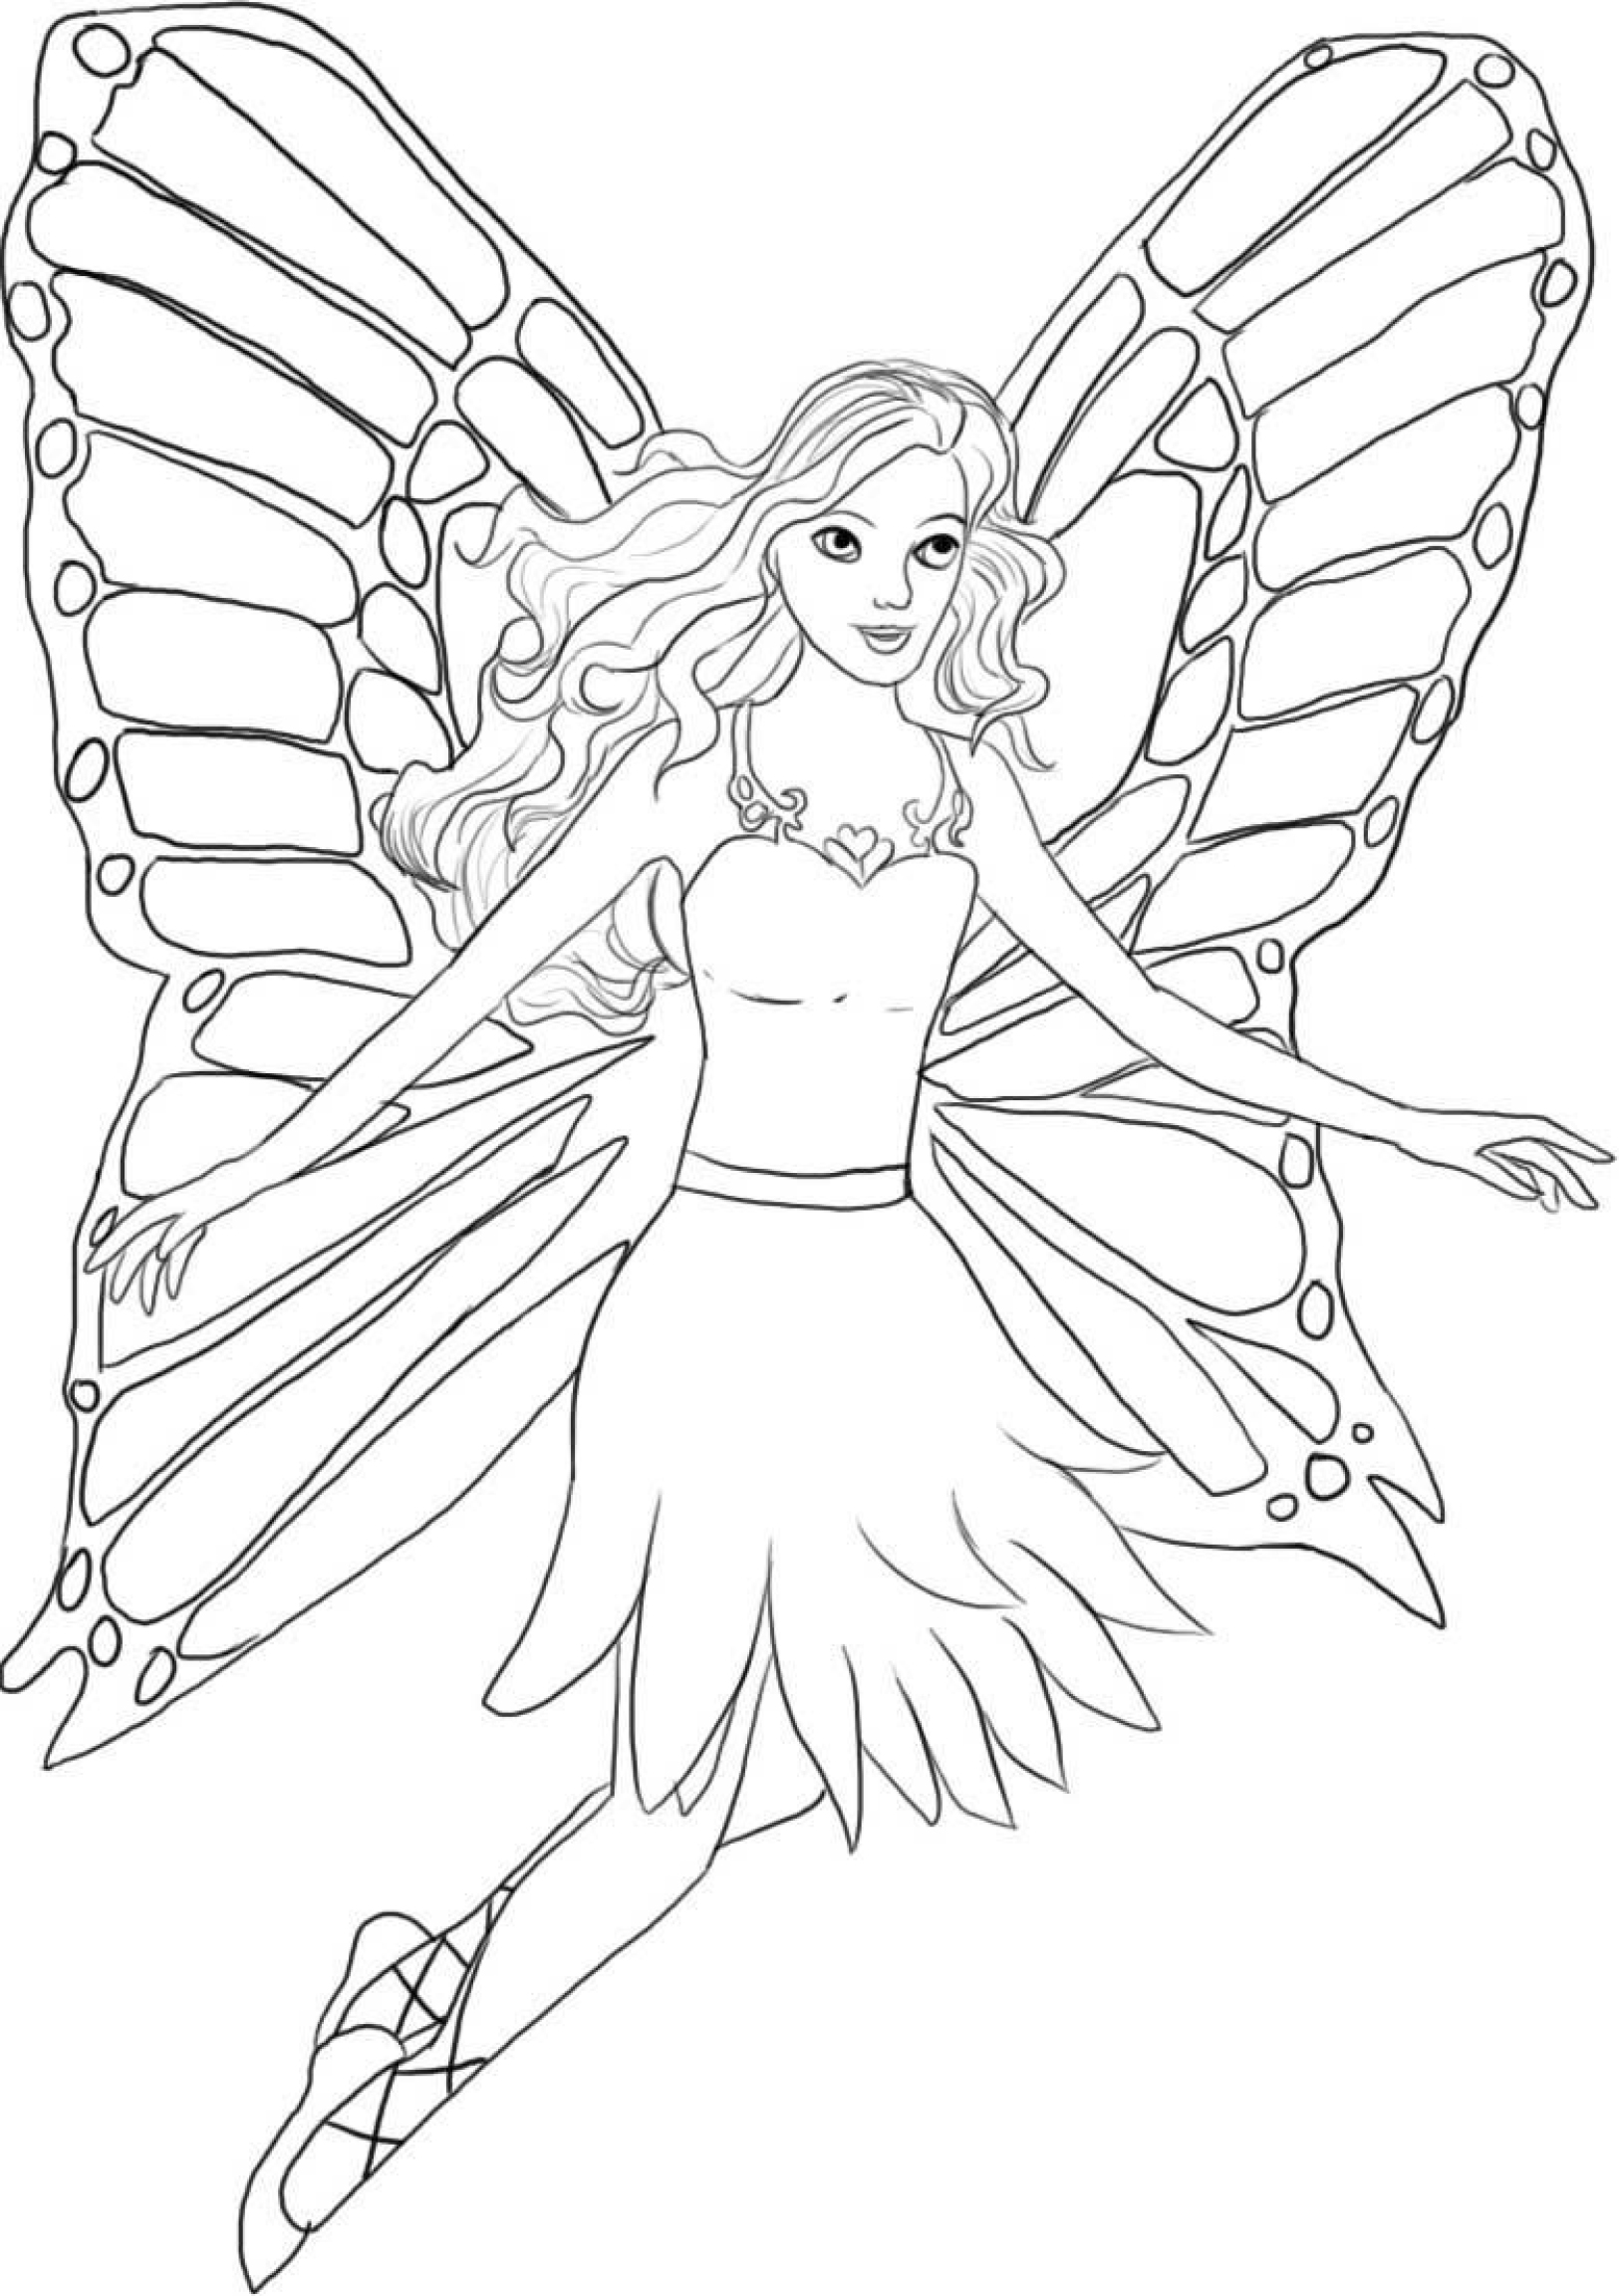 Tooth fairy coloring pages to download and print for free